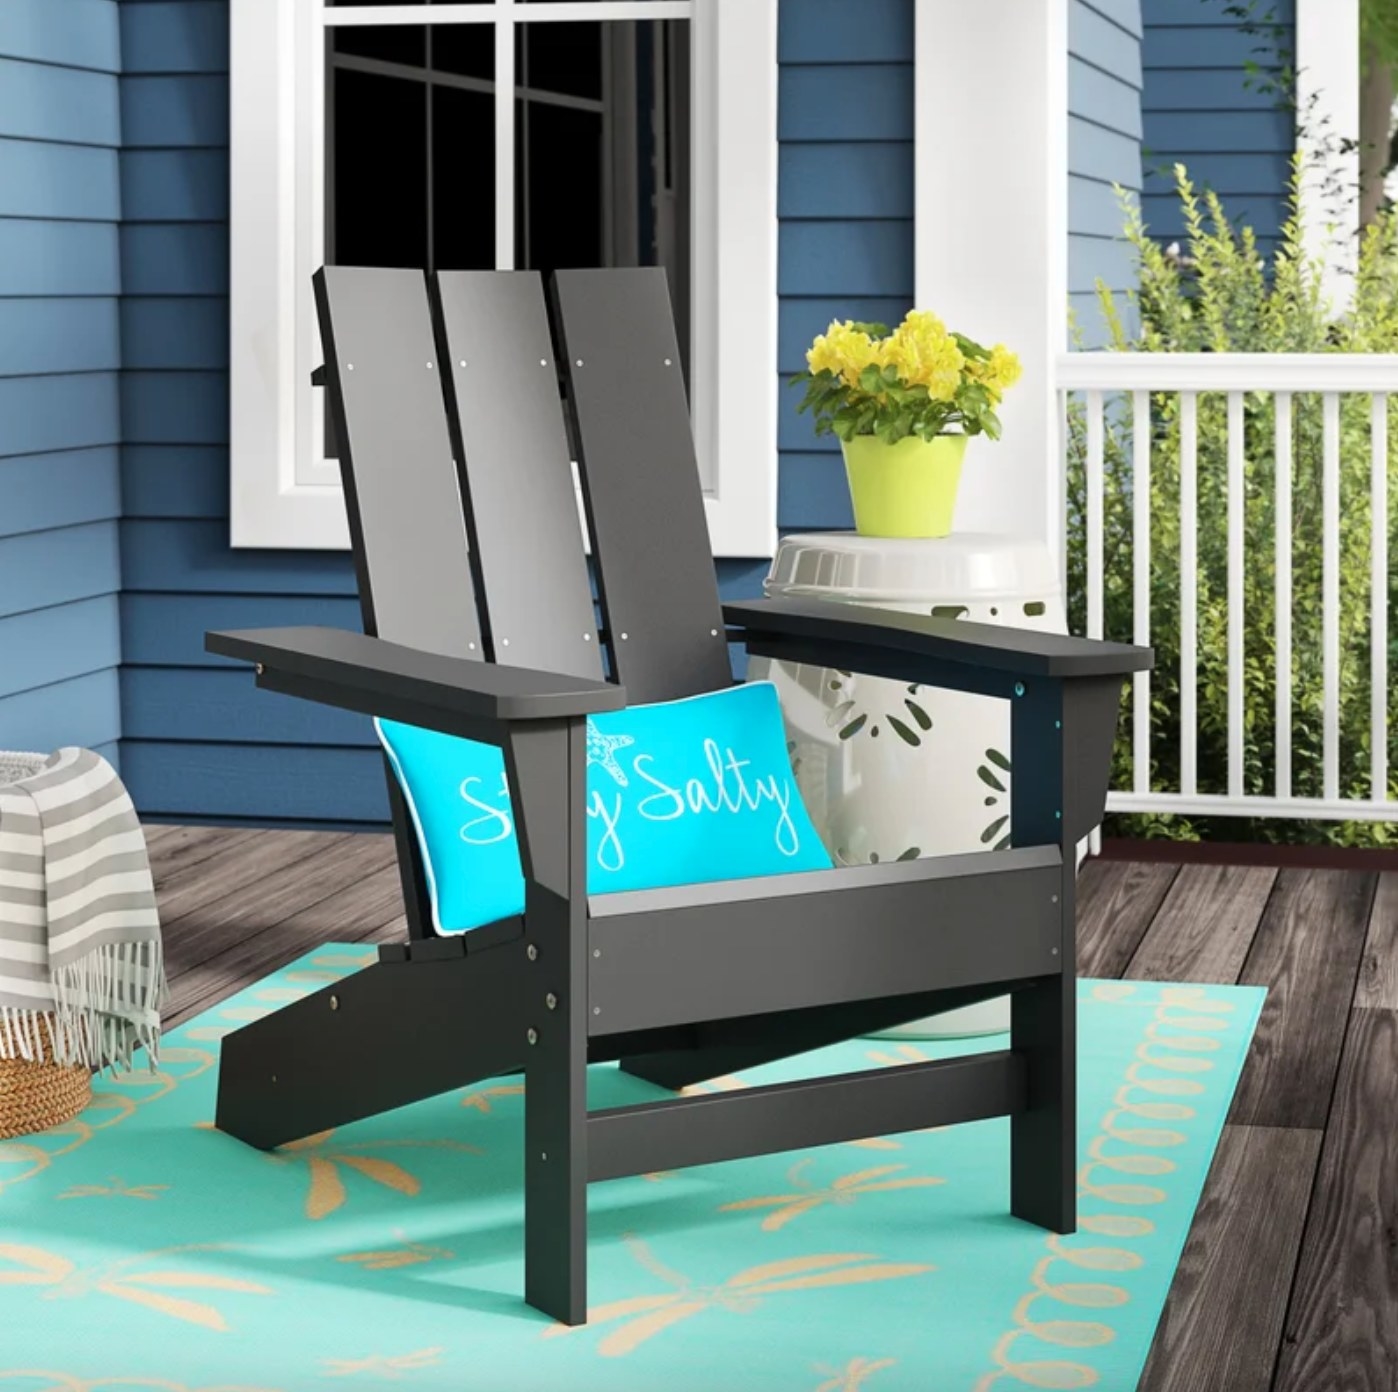 the Adirondack chair in black